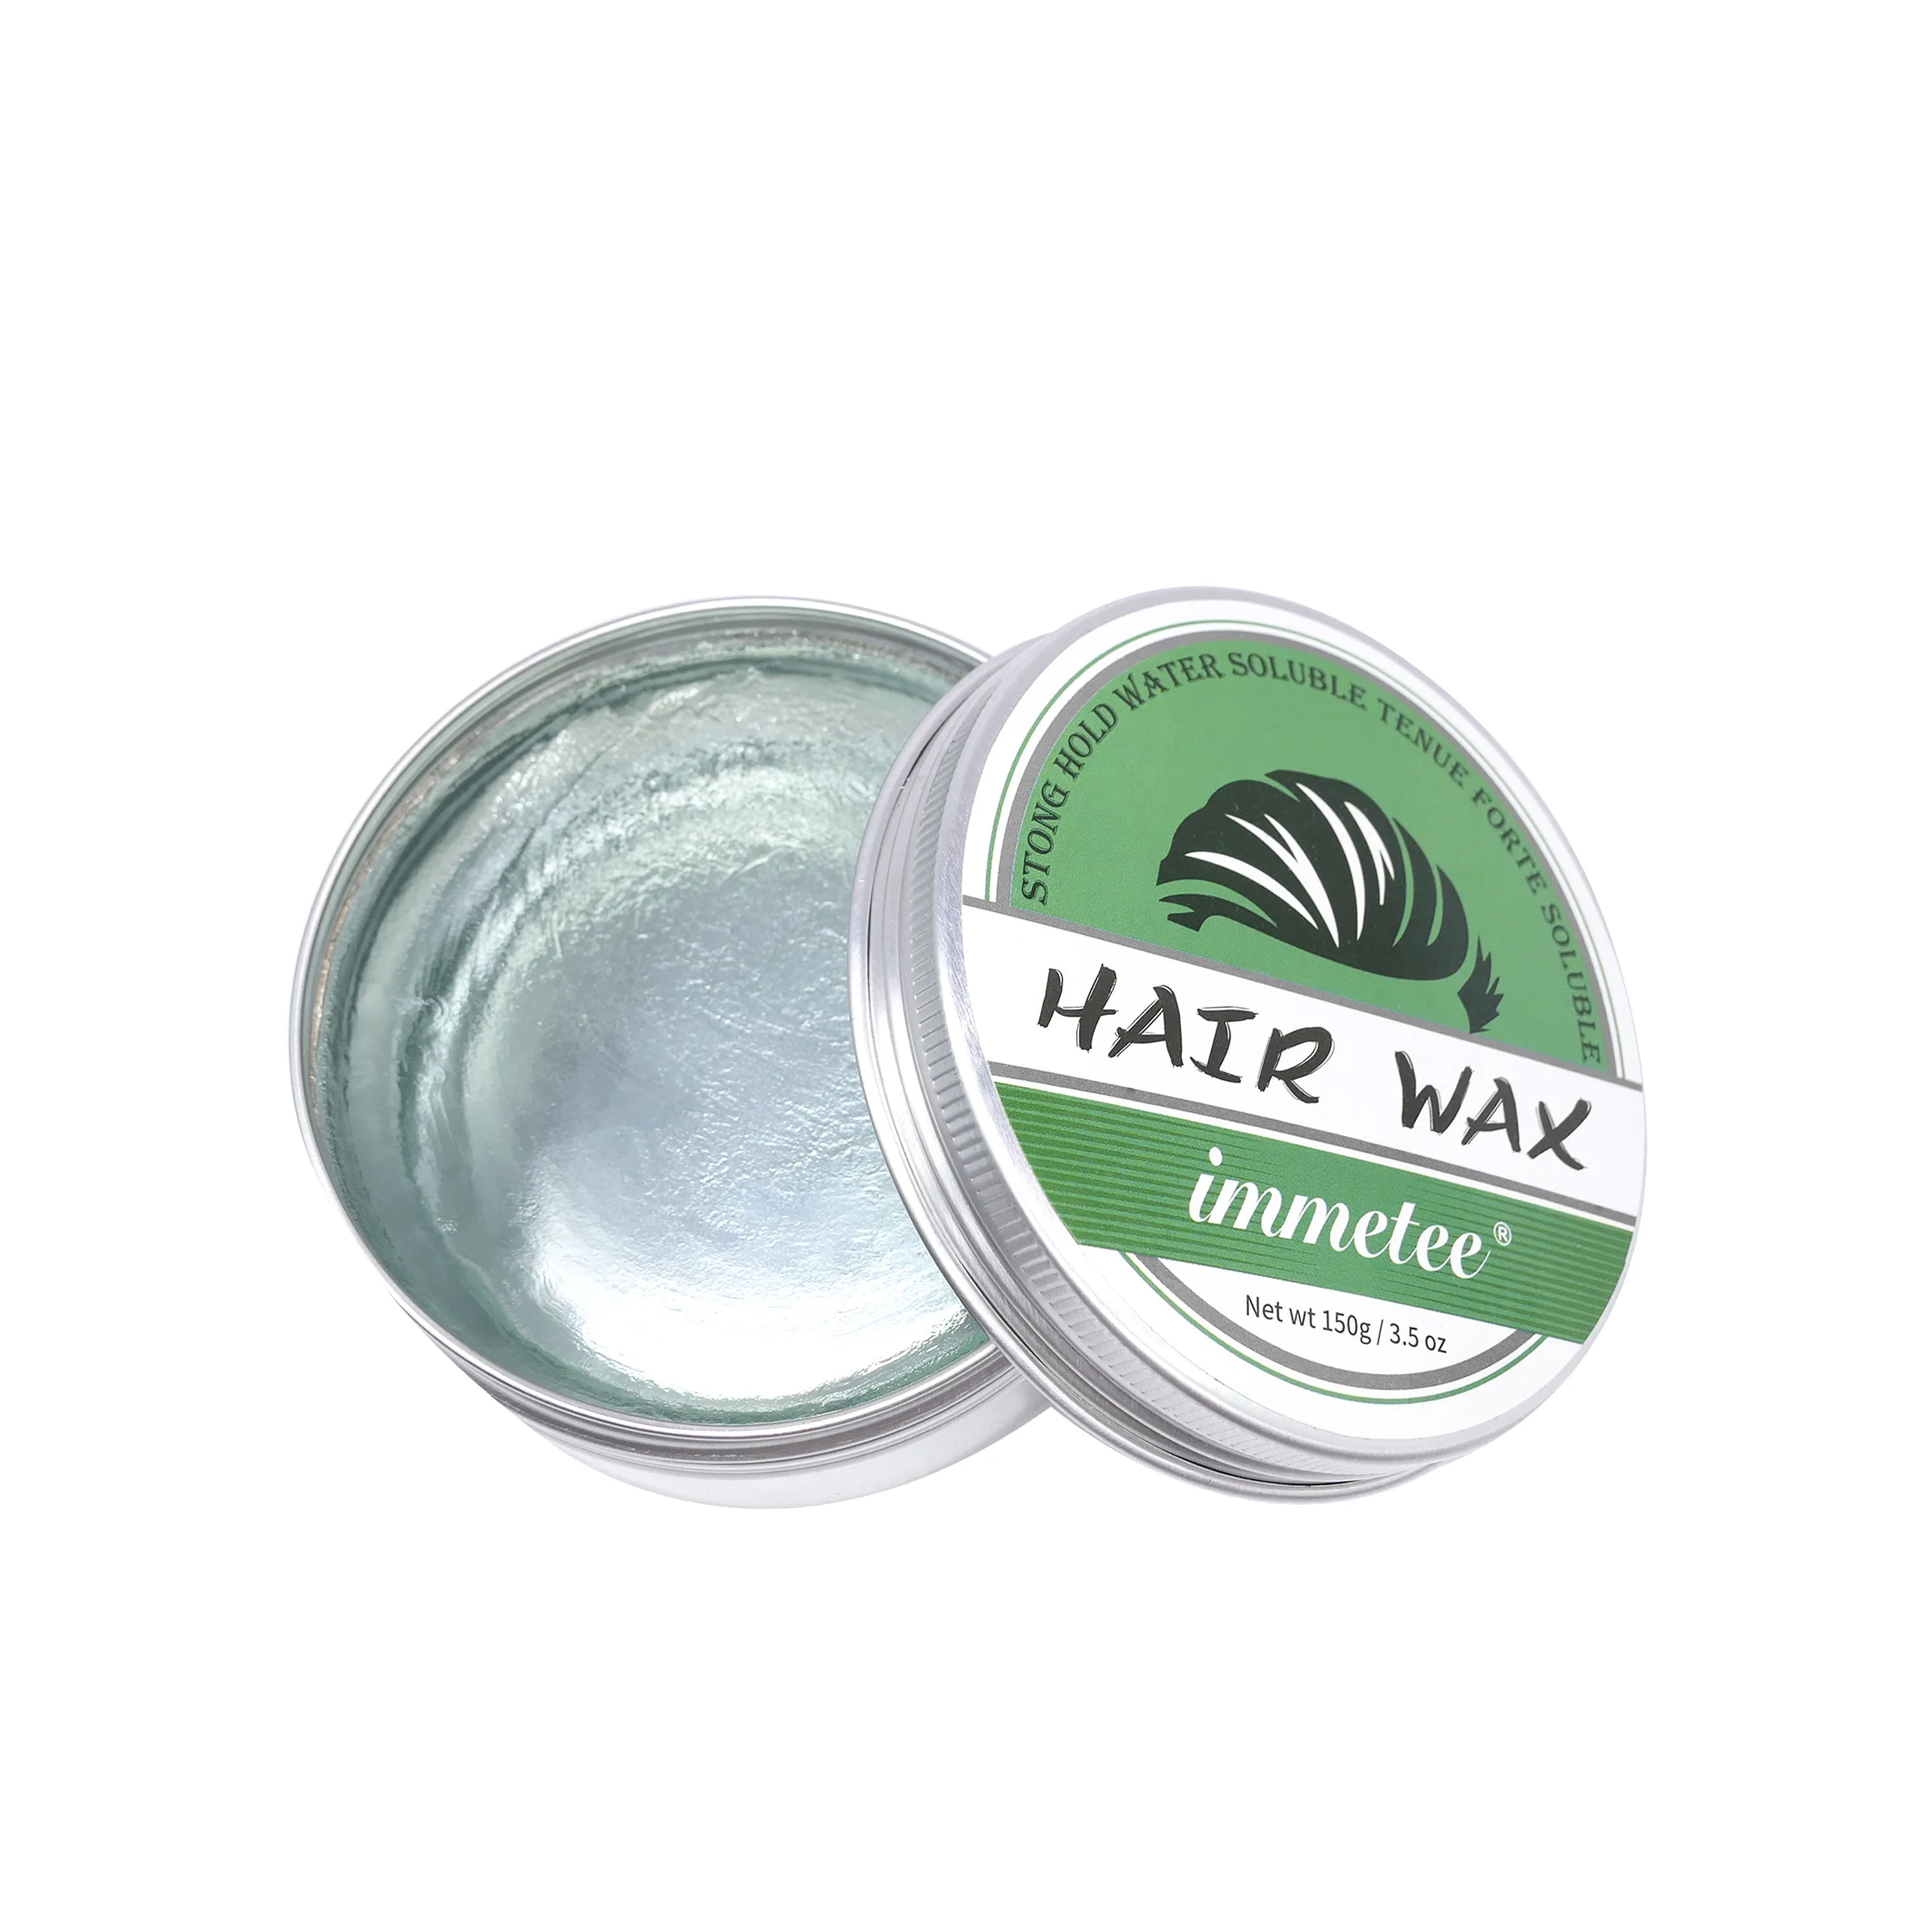 IMMETEE New Product Hair Color Wax For Men&Women Hair Styling Green 150g